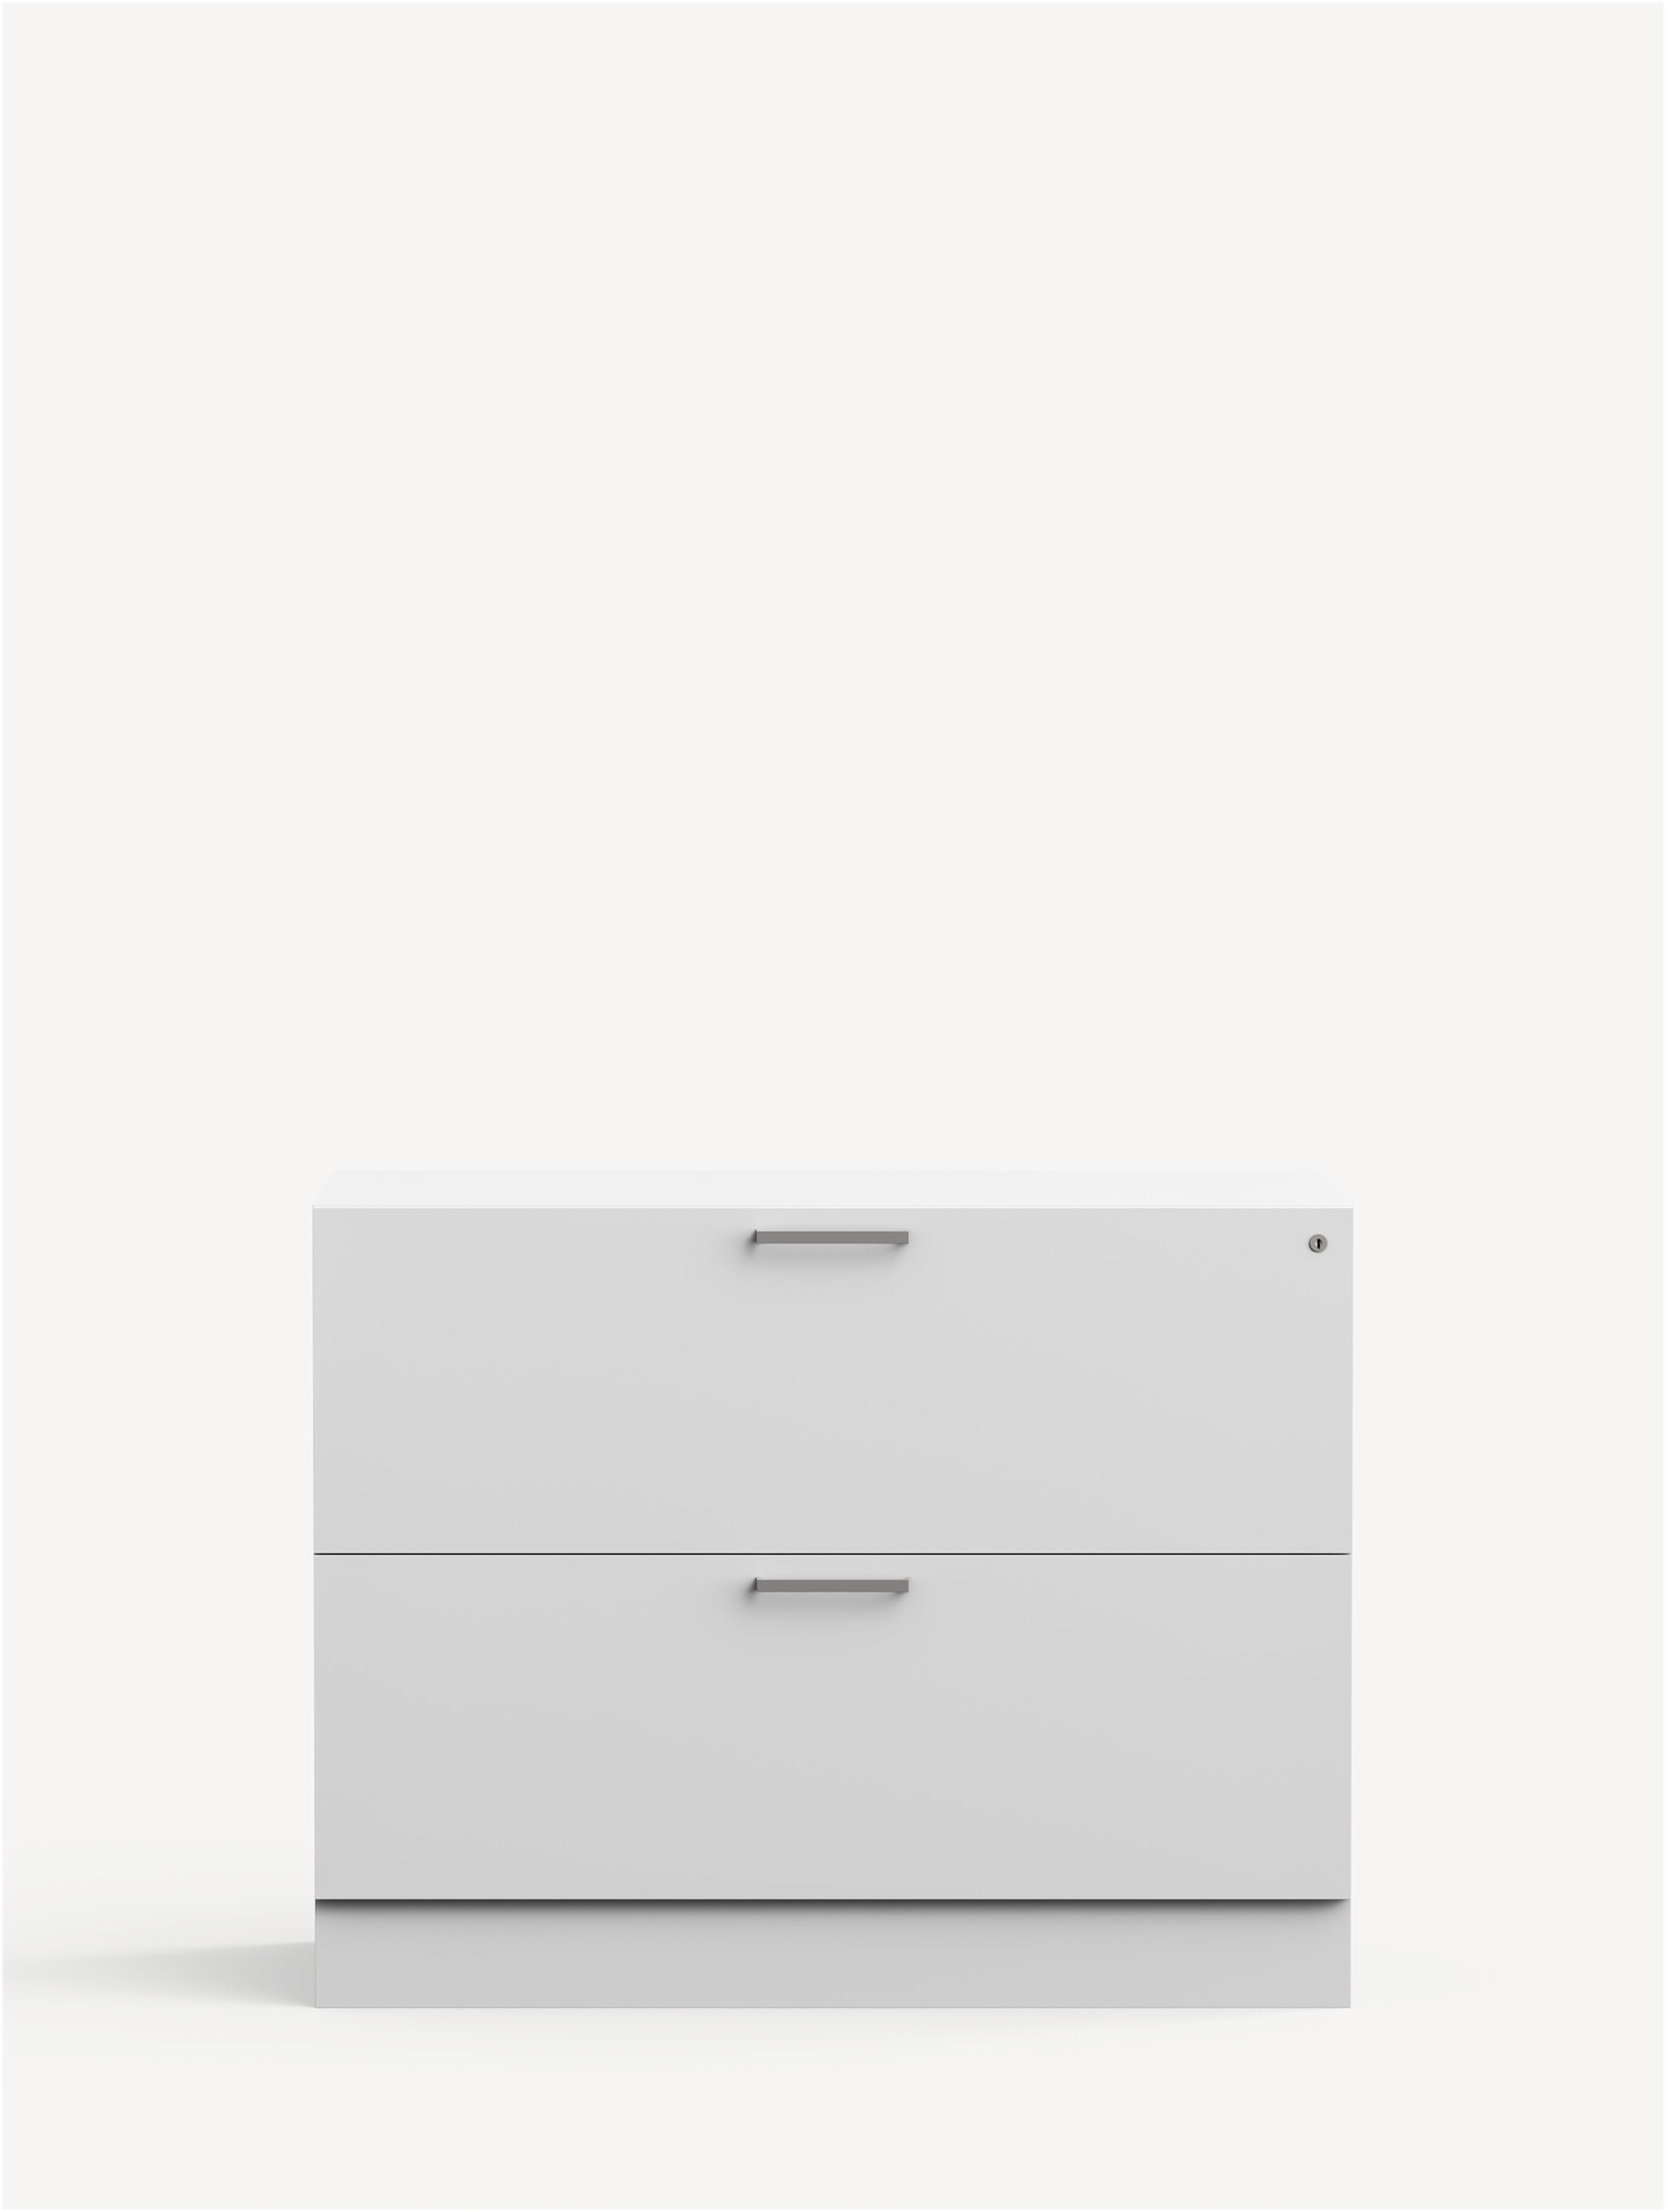 Align Lateral File in white with a recessed plinth base and two file drawers.